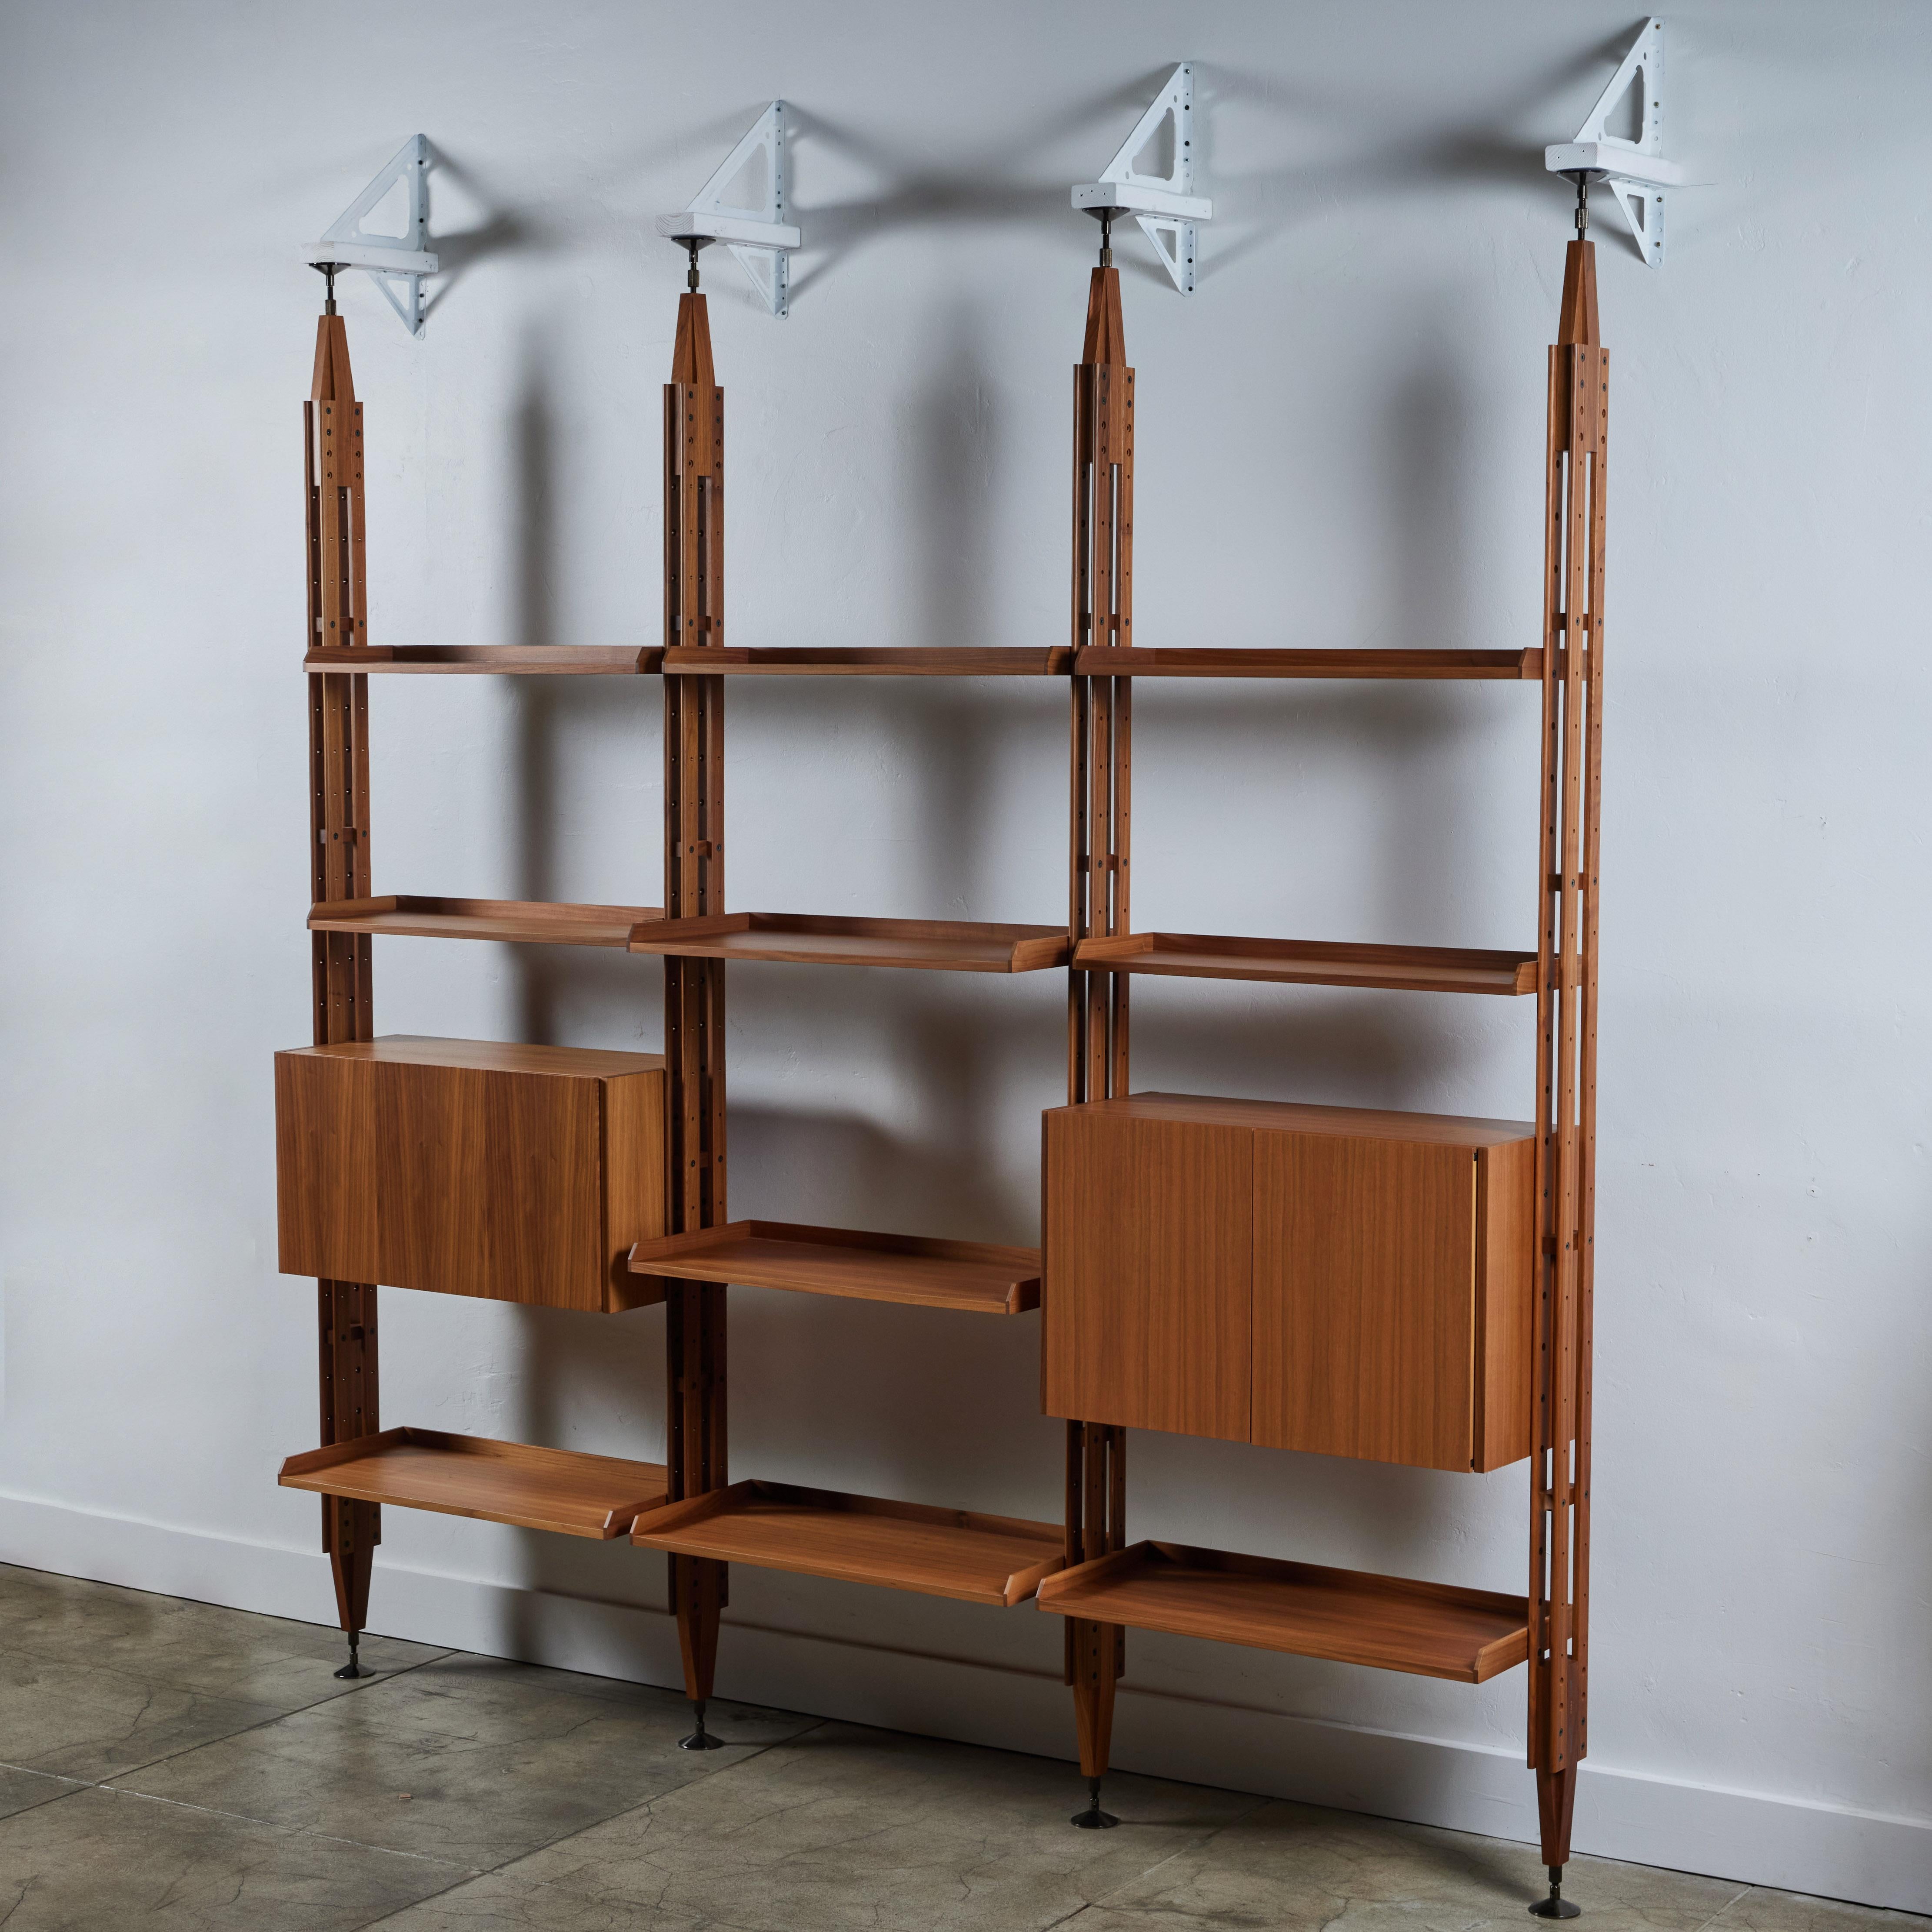 Franco Albini wall unit for Cassina, c.2010s Italy. This modular shelving system, first designed in the 1950s, was relaunched in 2008 and features three bays with teak bars and ten teak adjustable shelves. Also included are two cabinets for storage.